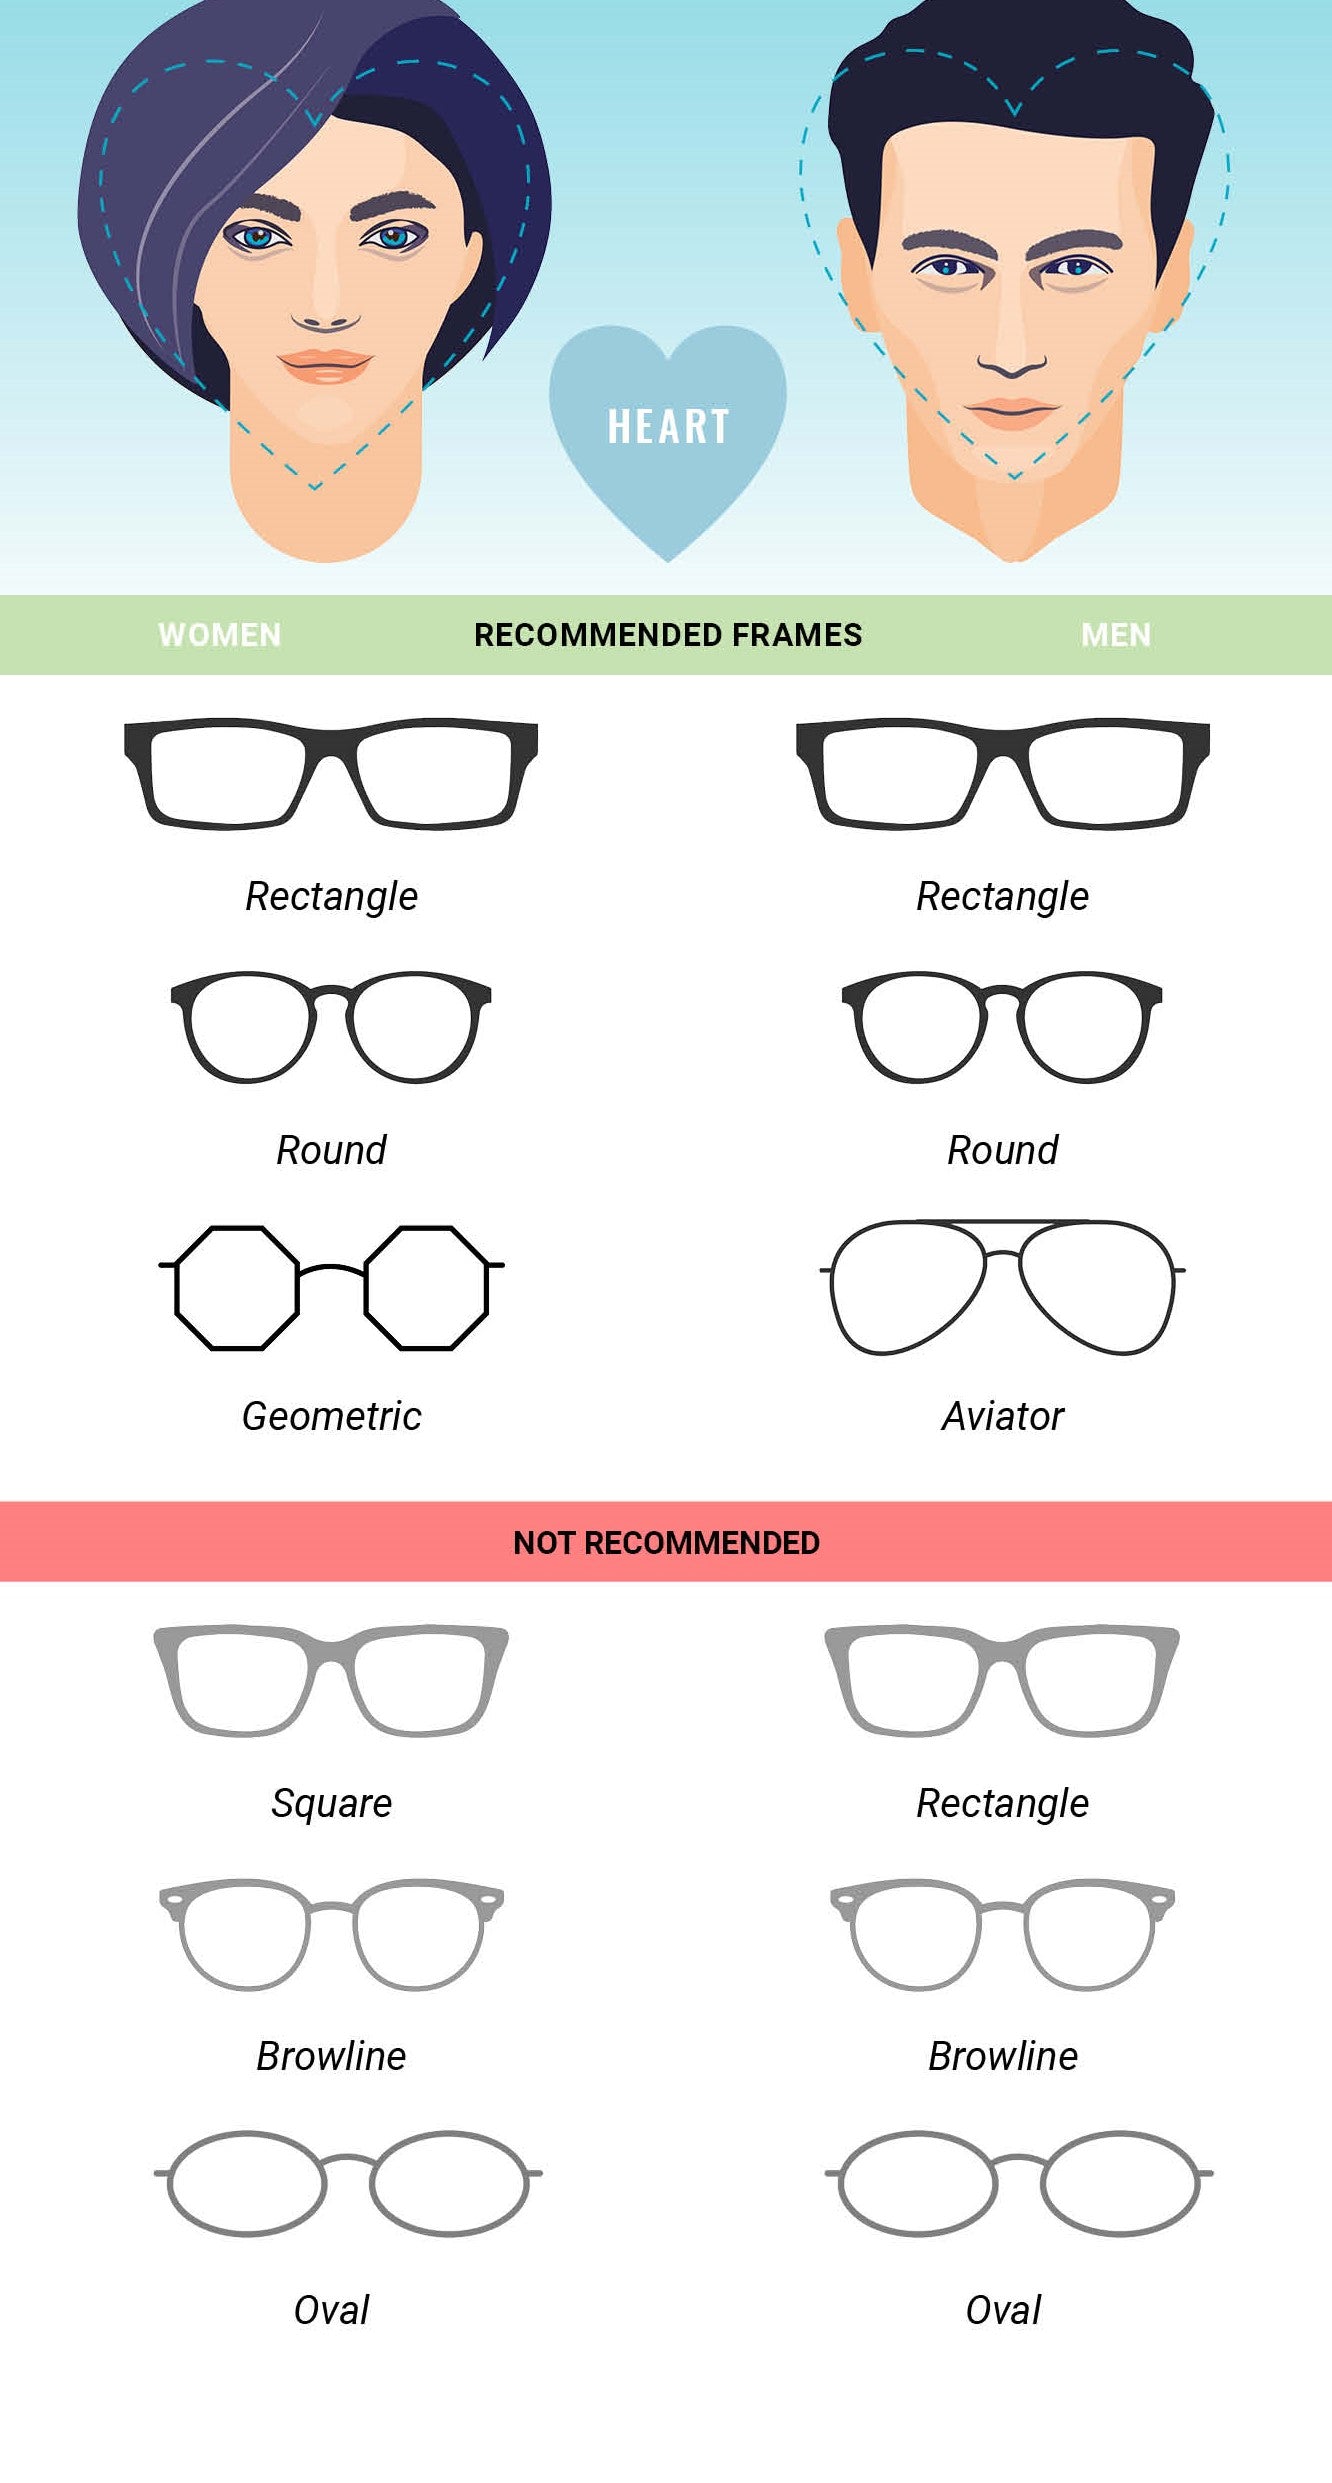 Eyeglass frame recommendations for heart face shapes for men and women